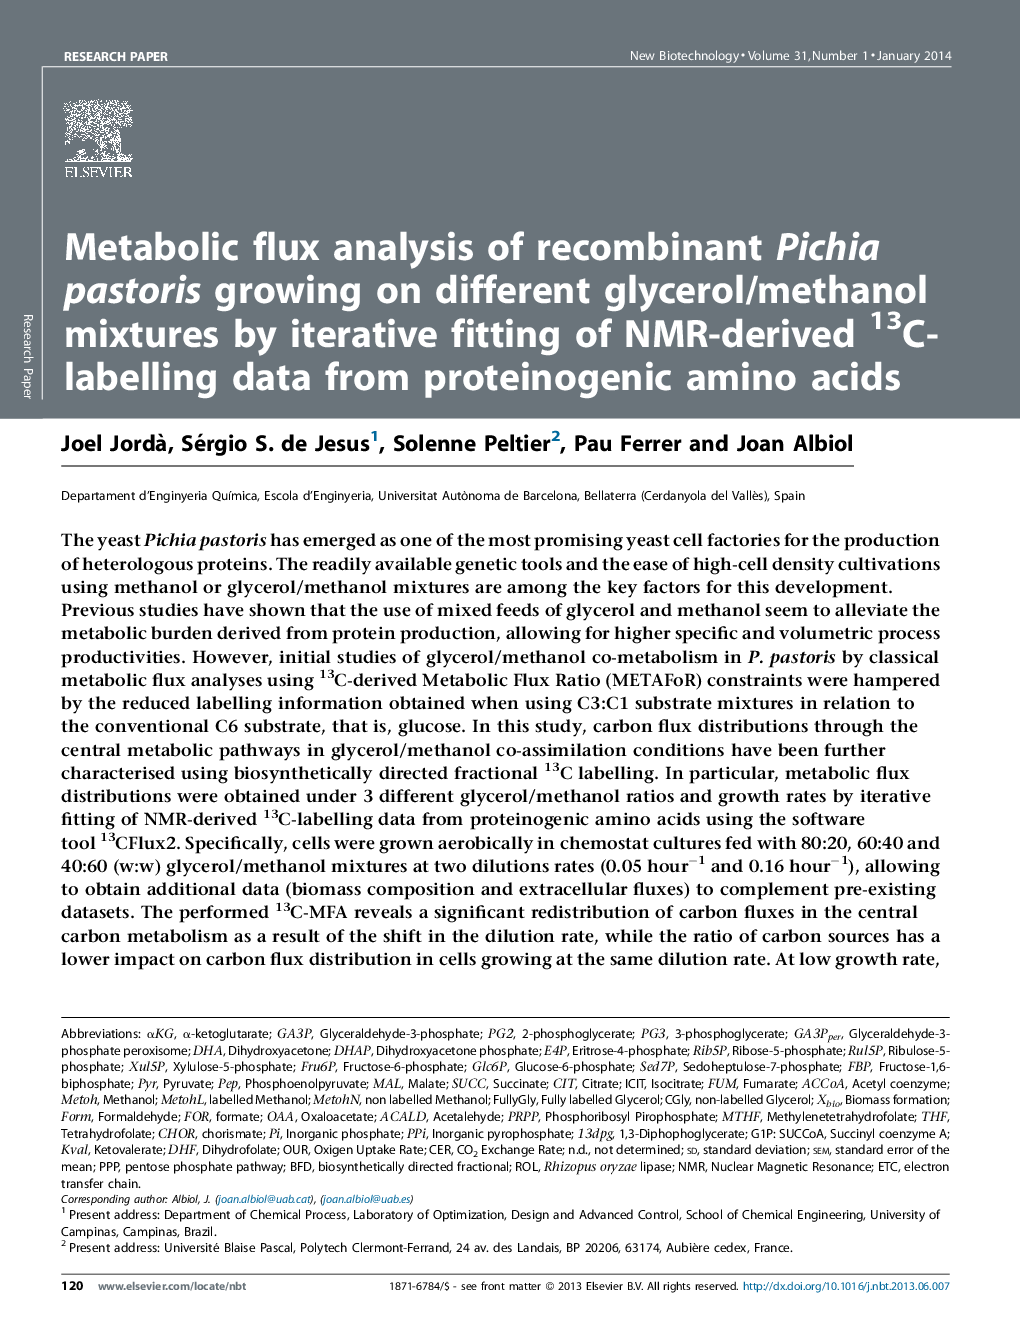 Metabolic flux analysis of recombinant Pichia pastoris growing on different glycerol/methanol mixtures by iterative fitting of NMR-derived 13C-labelling data from proteinogenic amino acids